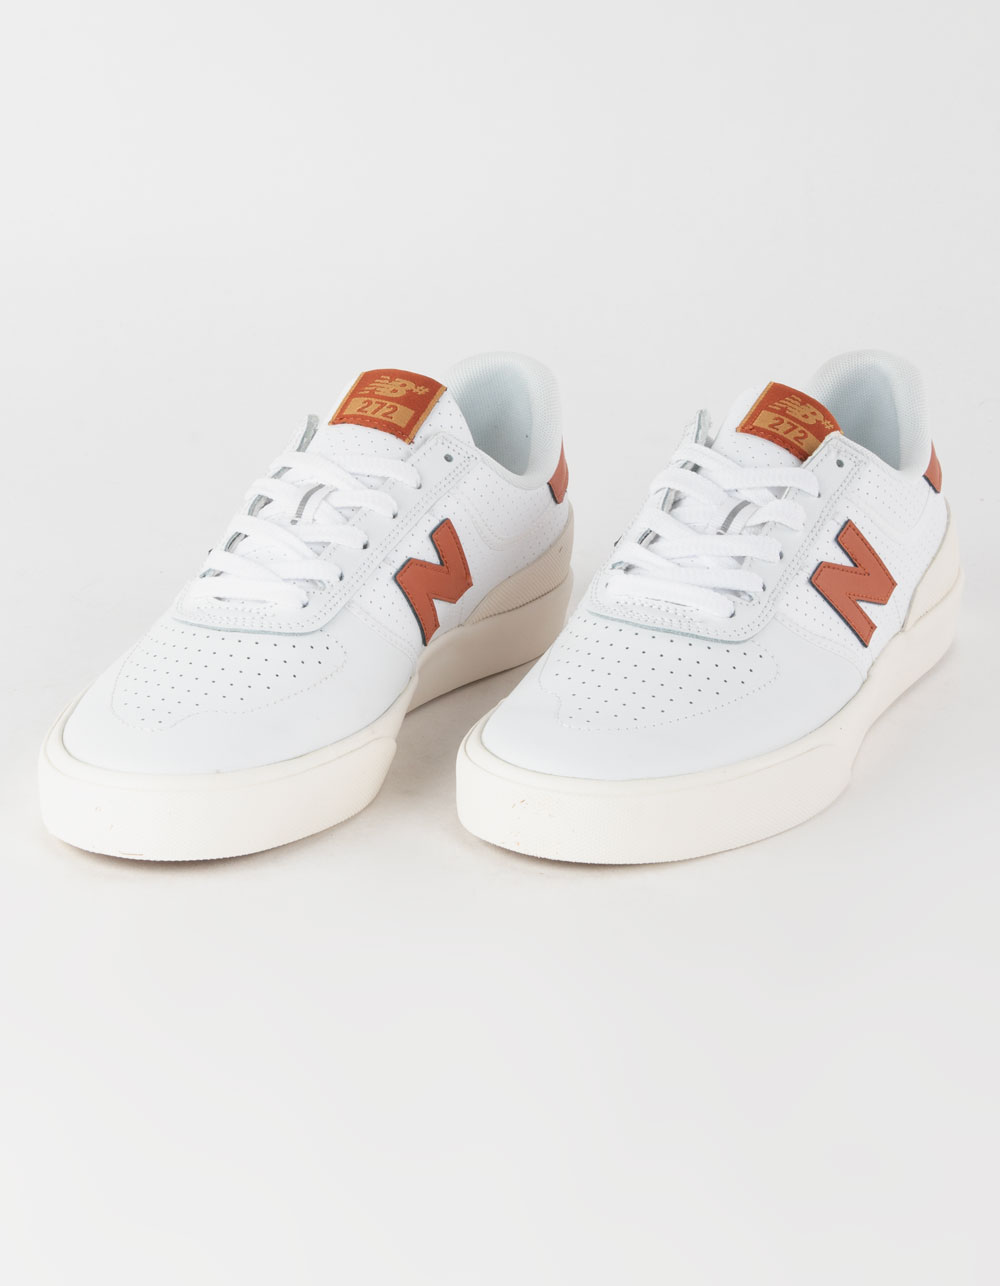 NEW BALANCE 272 Mens Shoes - WHITE/RUST | Tillys